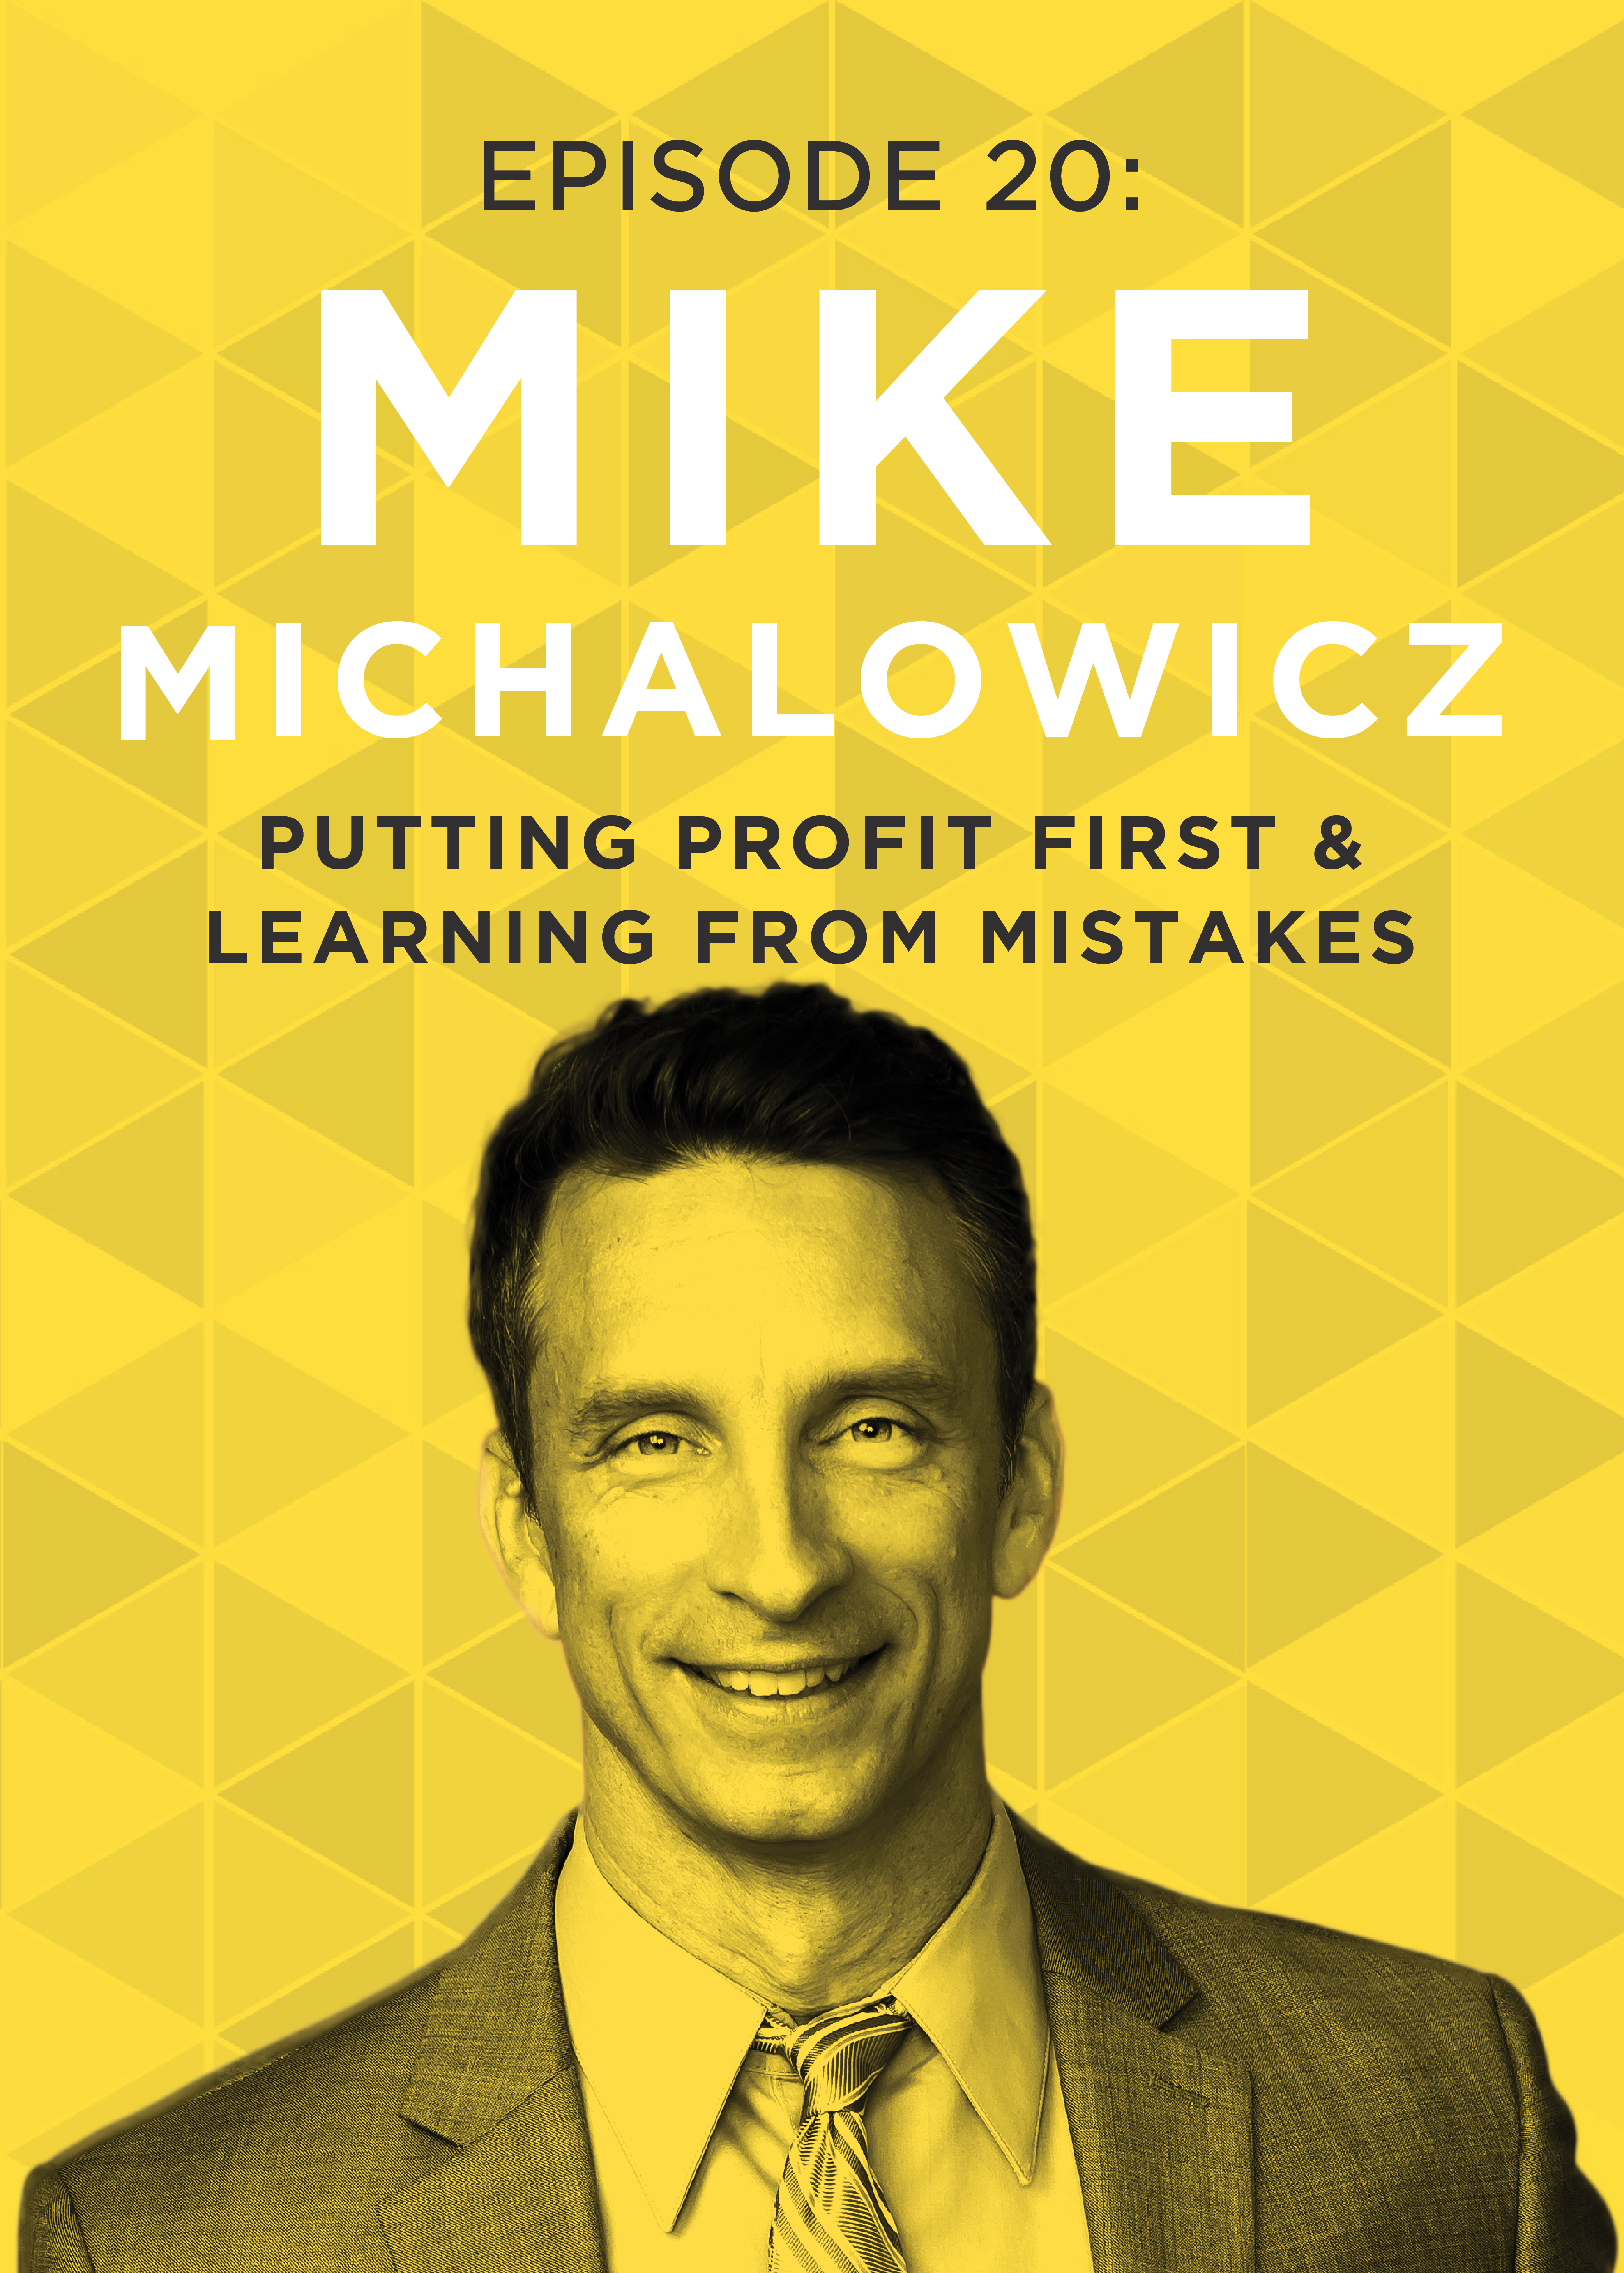 EP 20: Putting Profit First & Learning From Mistakes with Mike Michalowicz